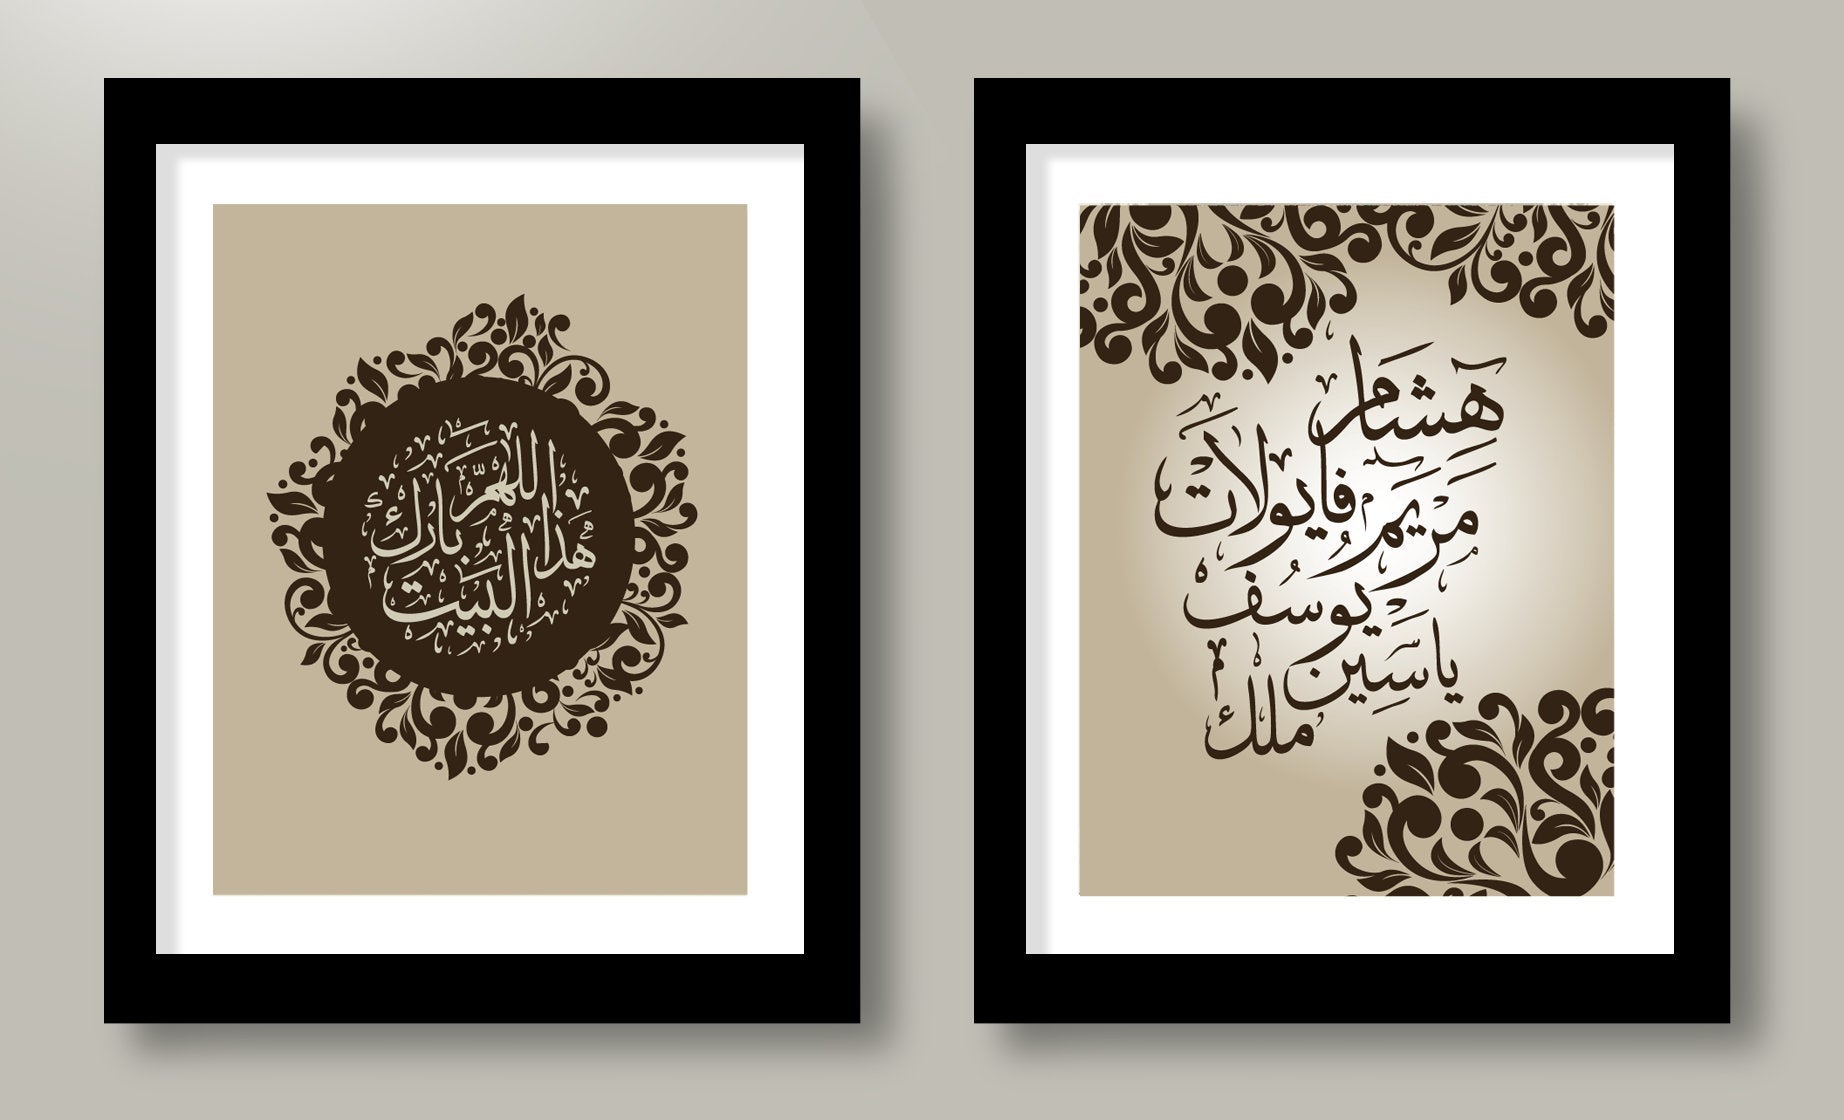 Personalized Family Members Names in Arabic Calligraphy print/poster wall art and "God Bless this house" in Arabic art - 8.5"x11" set of 2